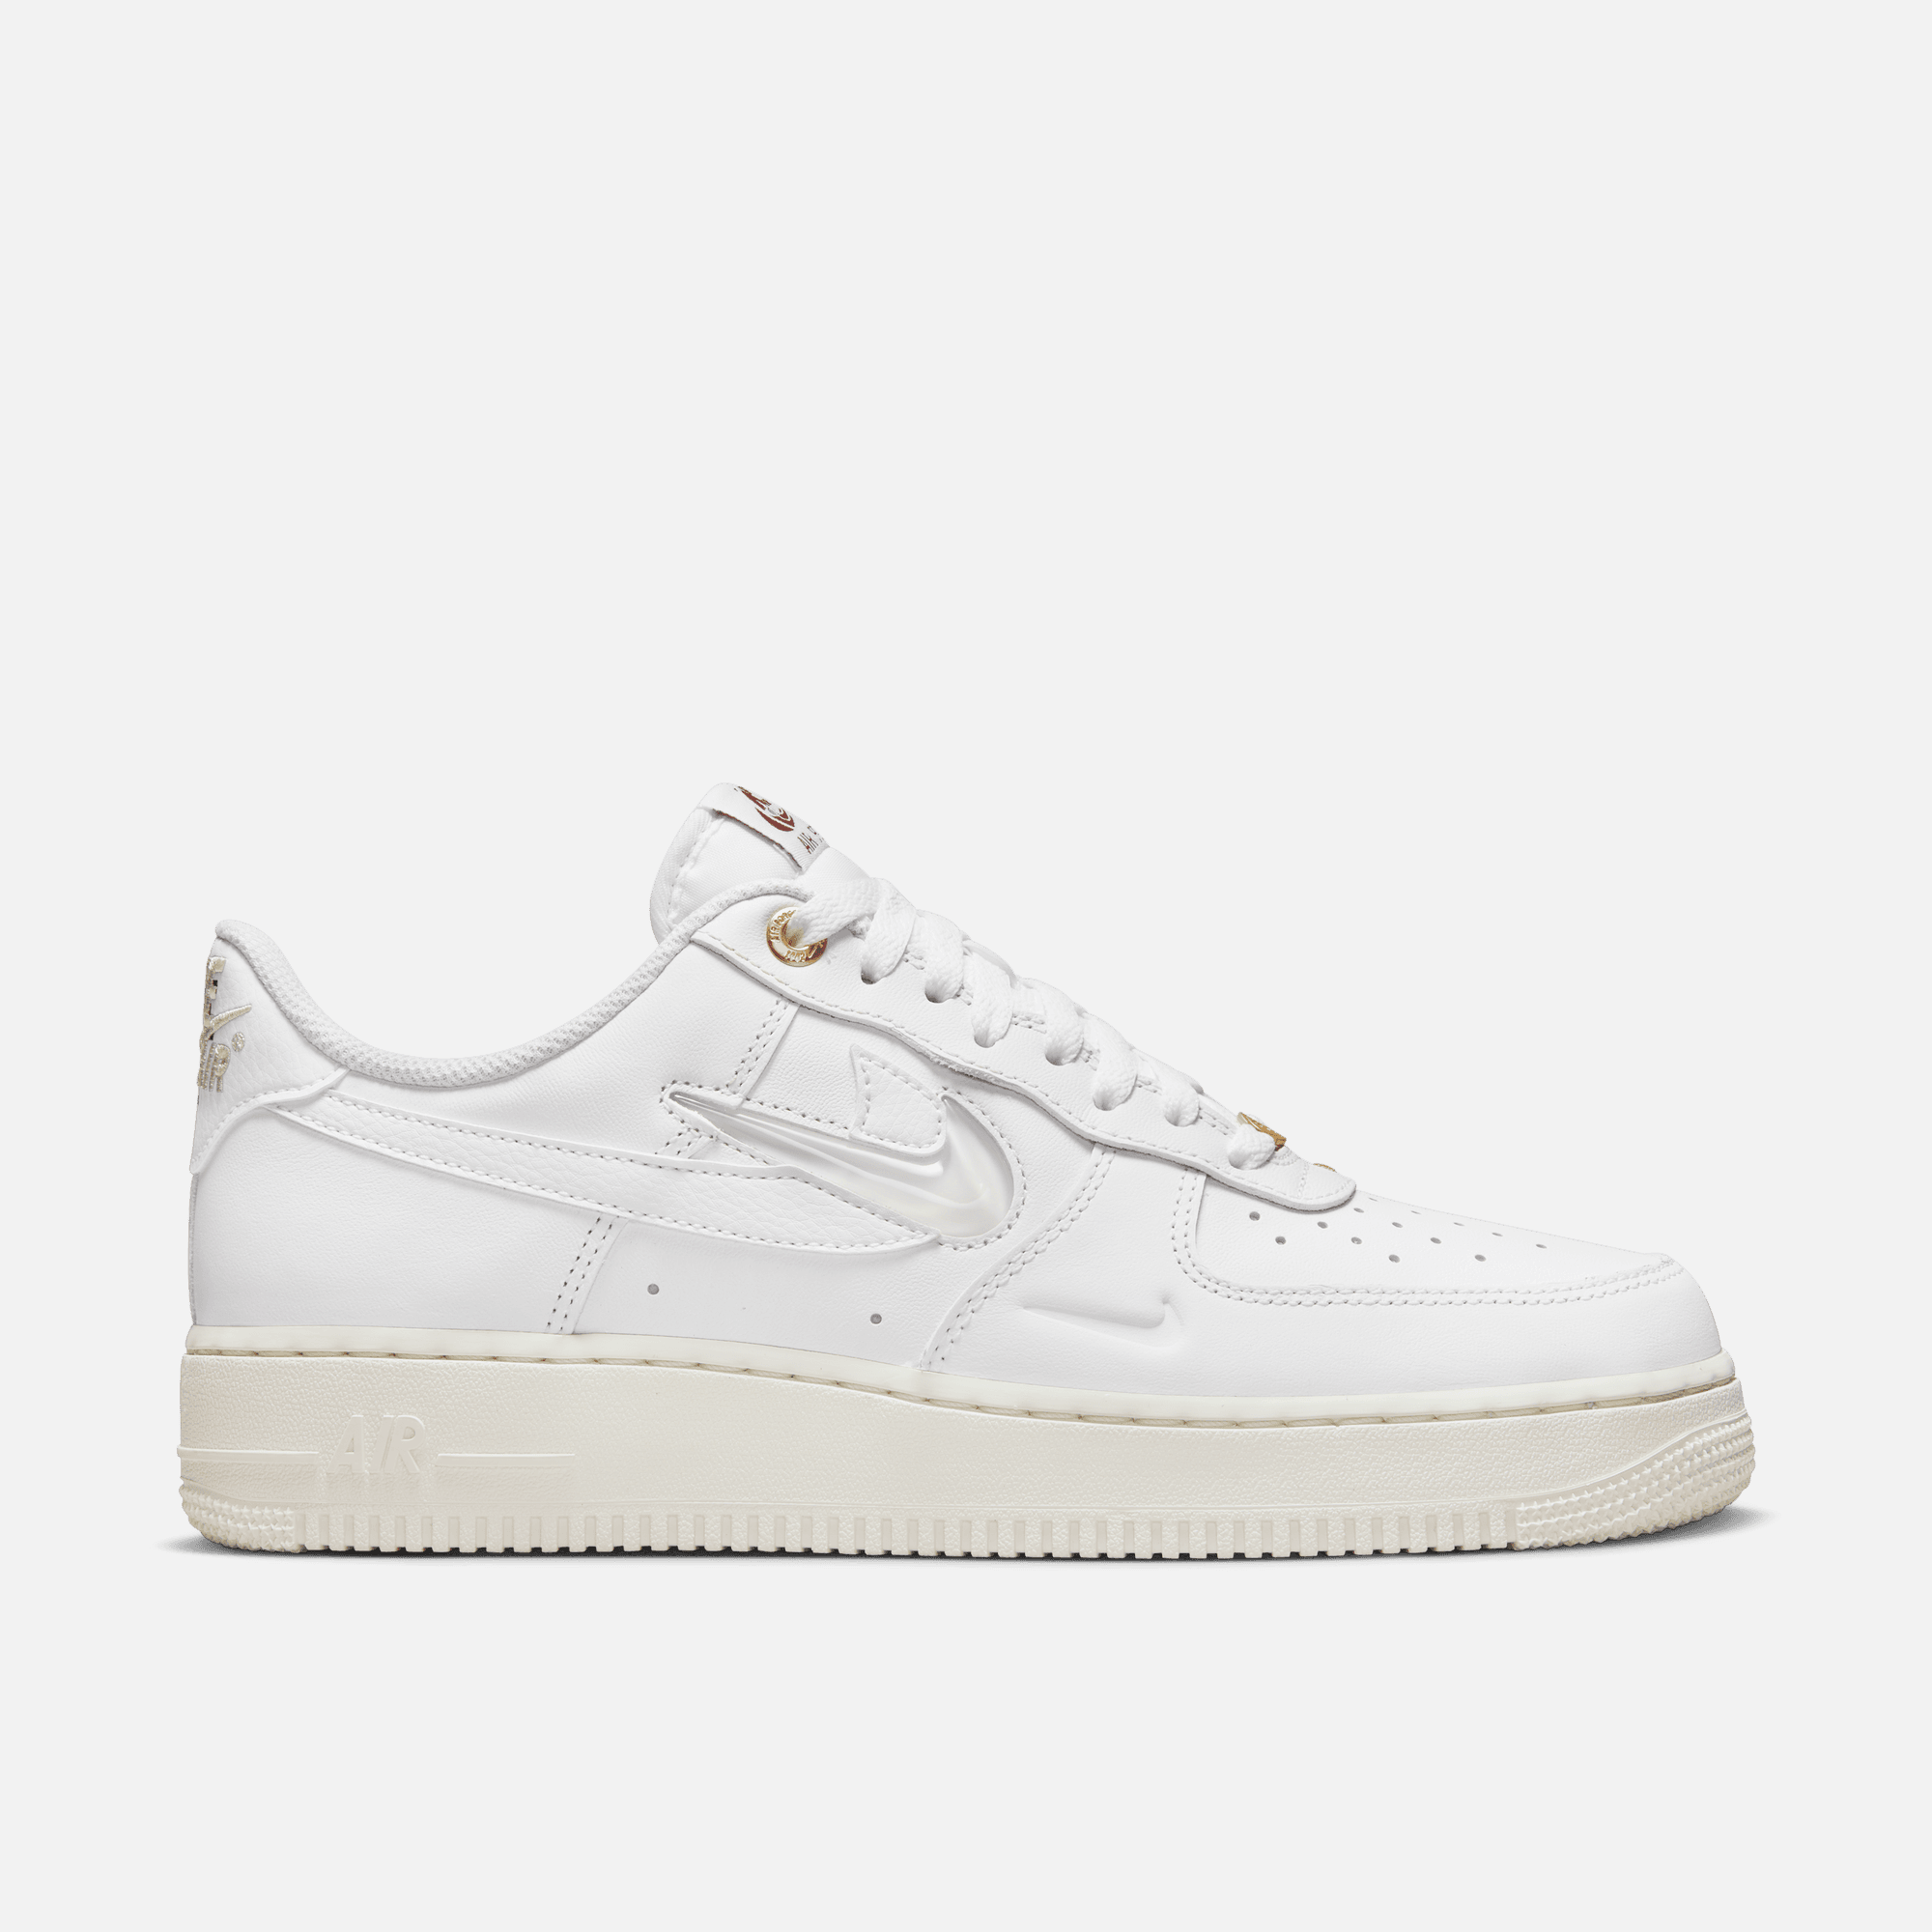 AIR FORCE 1 PRM "JOIN | lapstoneandhammer.com